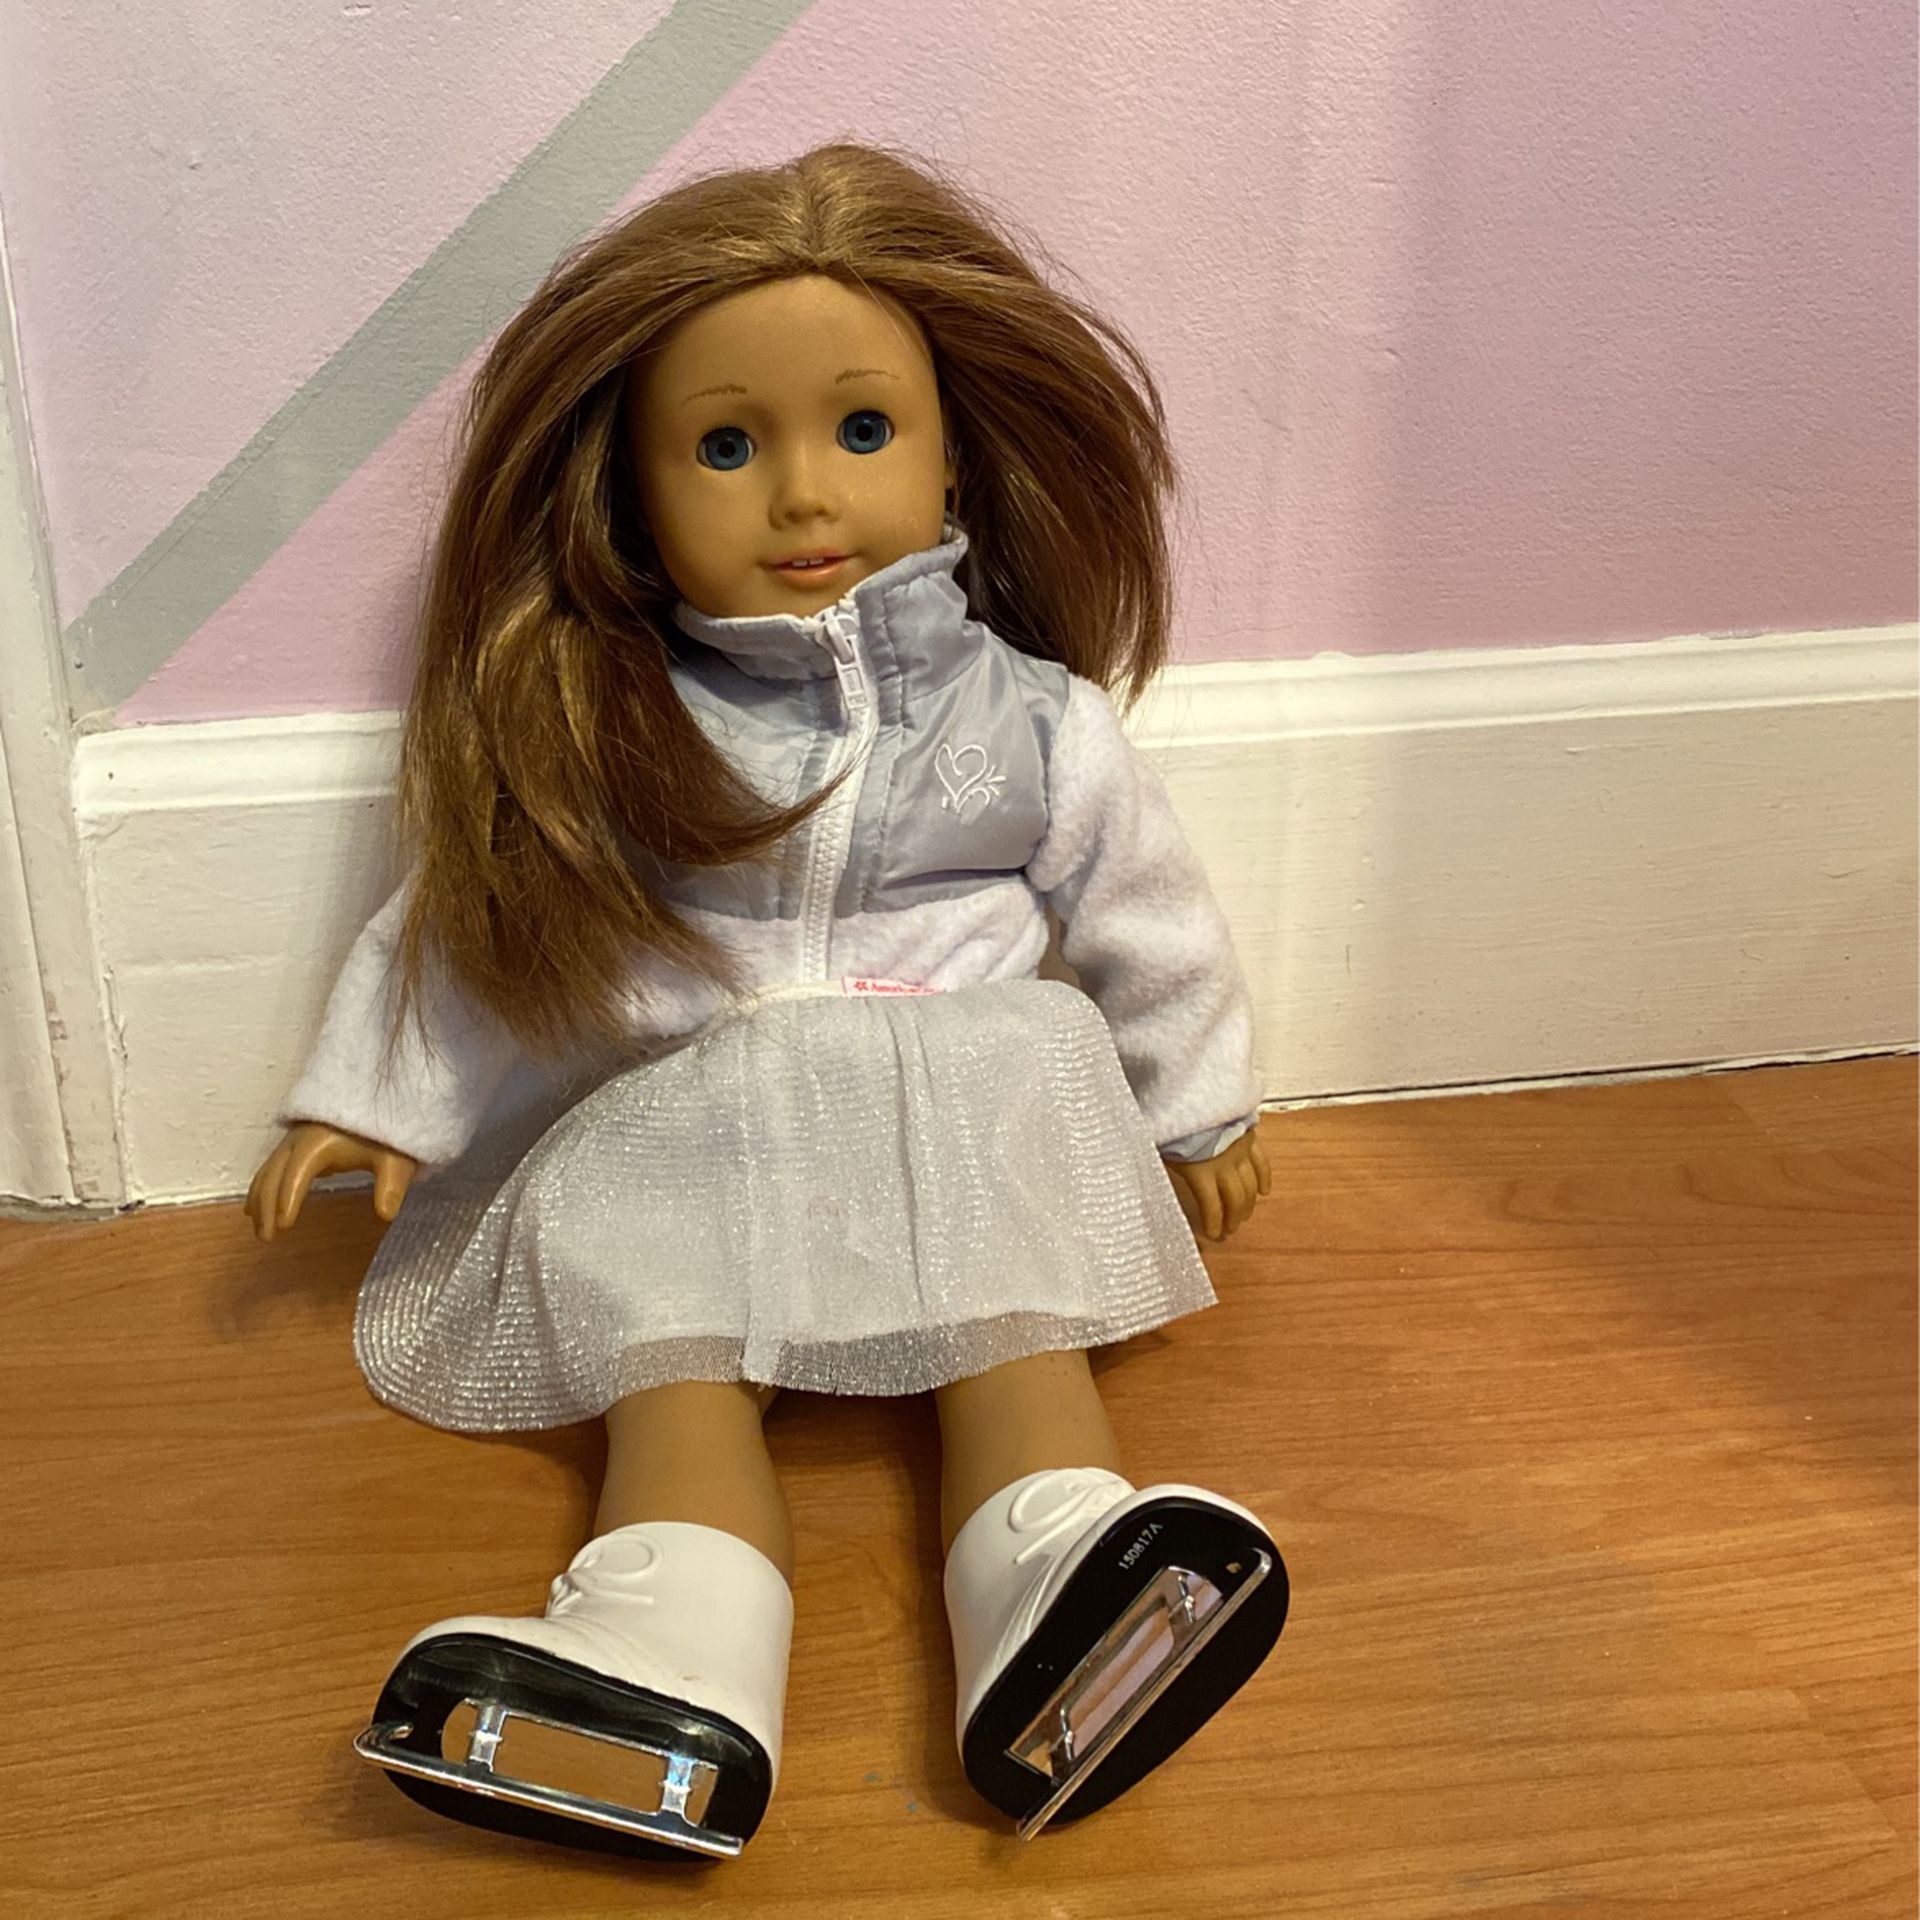 Original American Girl Doll And Accessories 